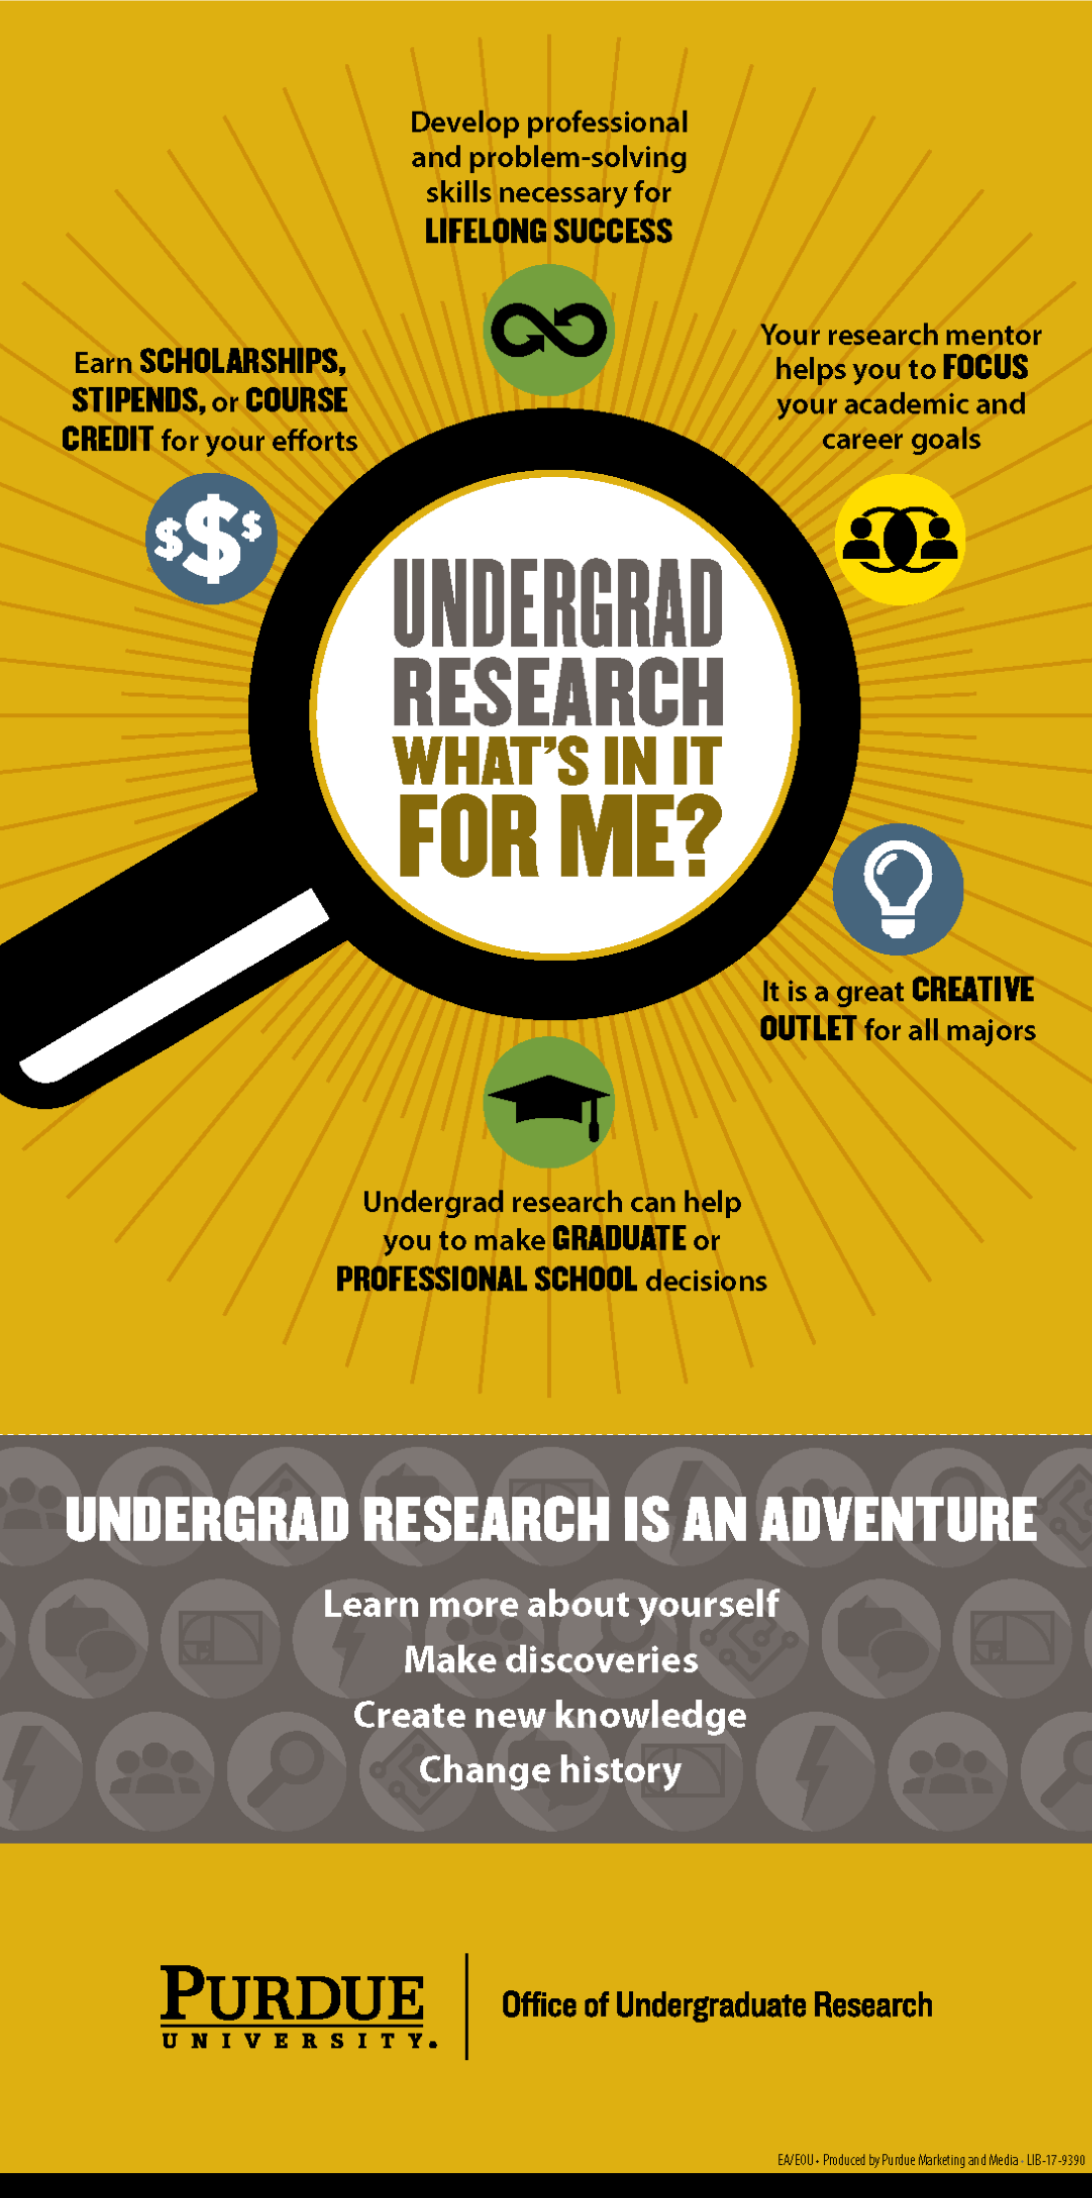 The first page of the document on benefits of and approaches to undergrad research. Link to the pdf is in text.